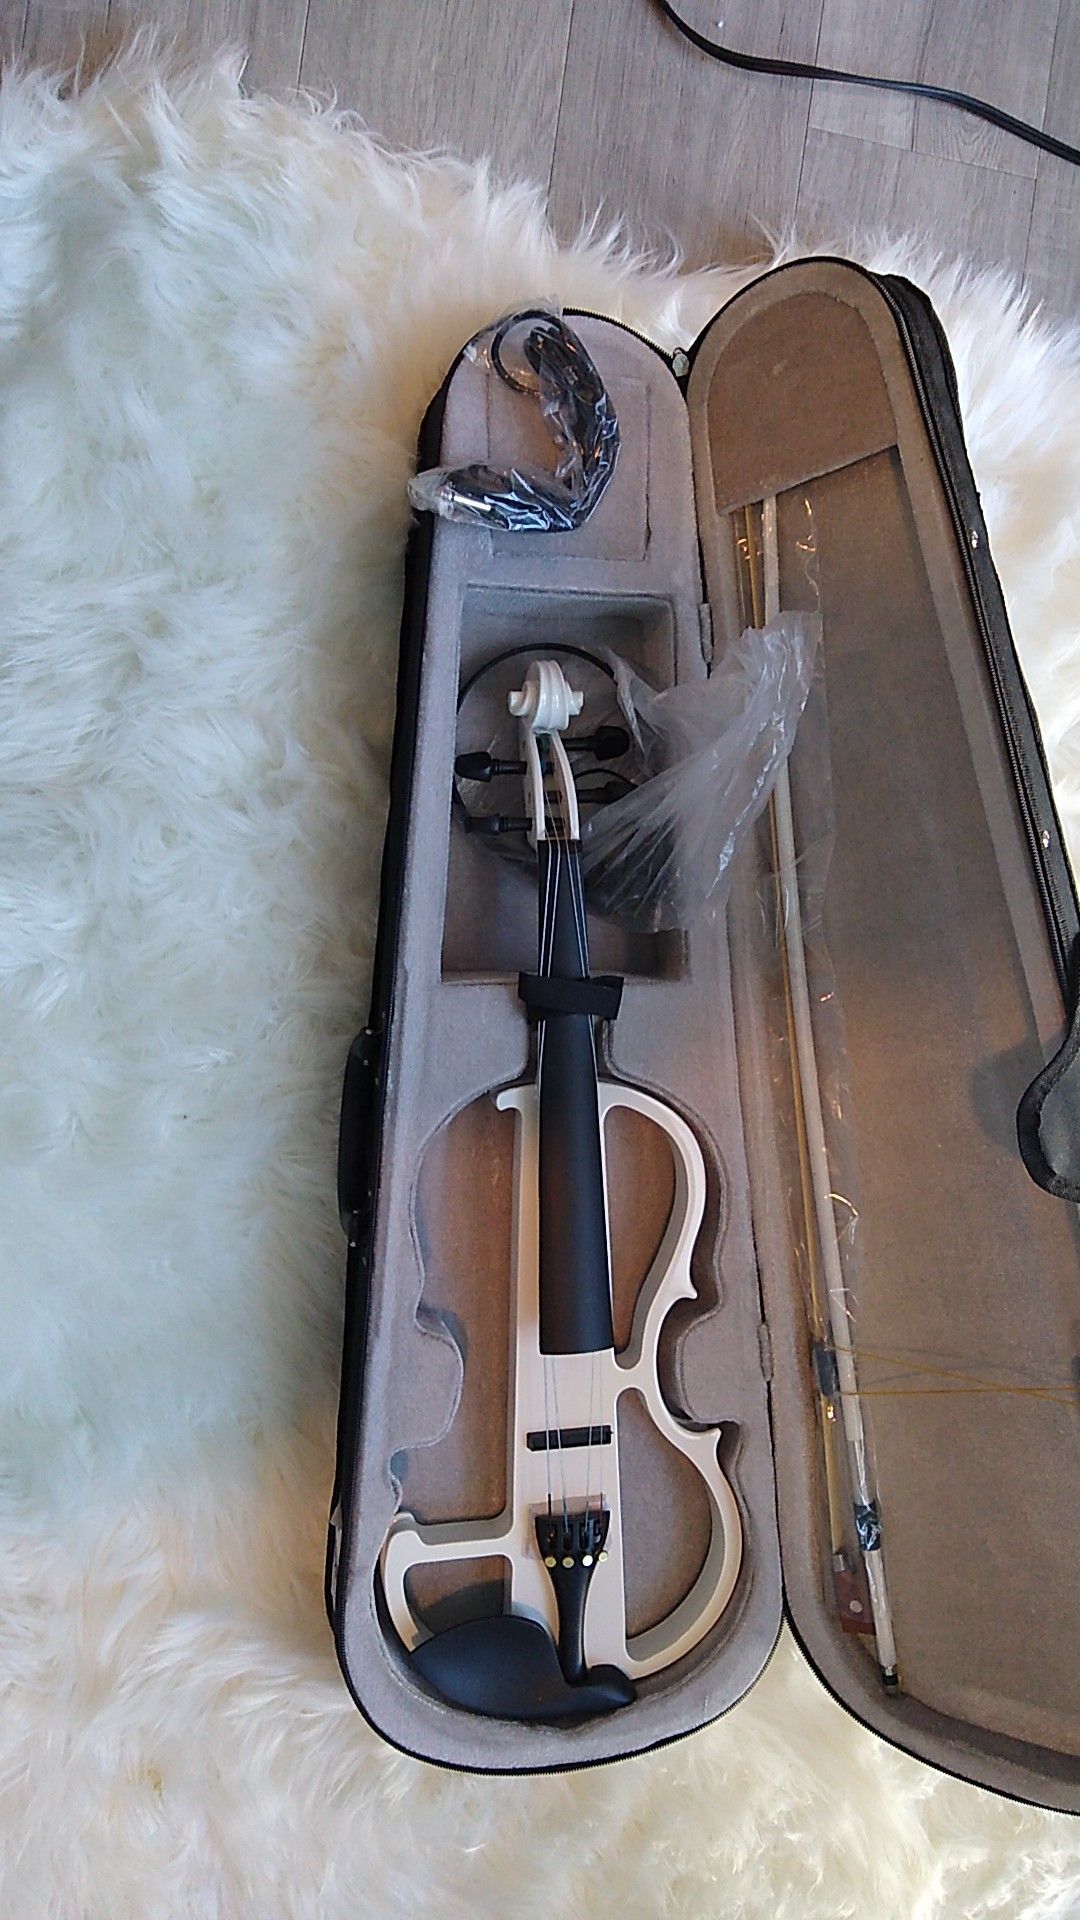 Electric violin never used